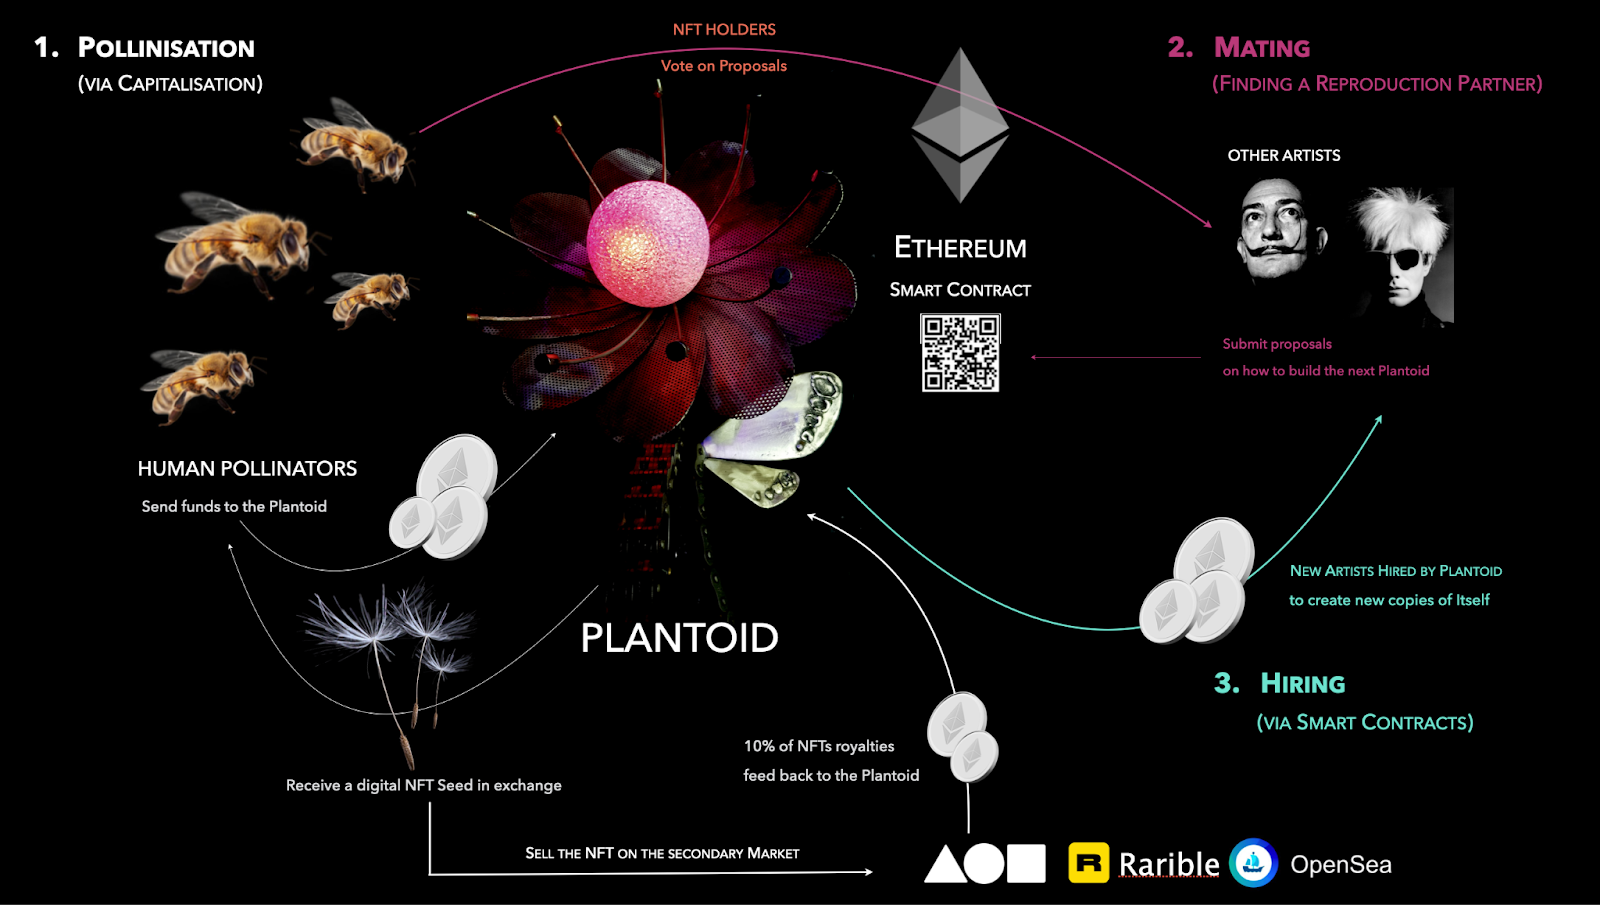 The plantoid art project provides a prototypical model of how interspecies agents can incentivize human counterparts. “Like any living thing, the Plantoid's main goal is to reproduce itself. It does this inviting people to transact cryptocurrency in order to purchase one of its valuable NFT Seeds. This cryptocurrency is sent through the blockchain and is collected by the Plantoid. Everytime the seeds are sold on the secondary market, the Plantoid receives 10% of royalties.” Source (https://plantoid.org/): Screenshot from the Plantoïd website, used under a fair use rationale.